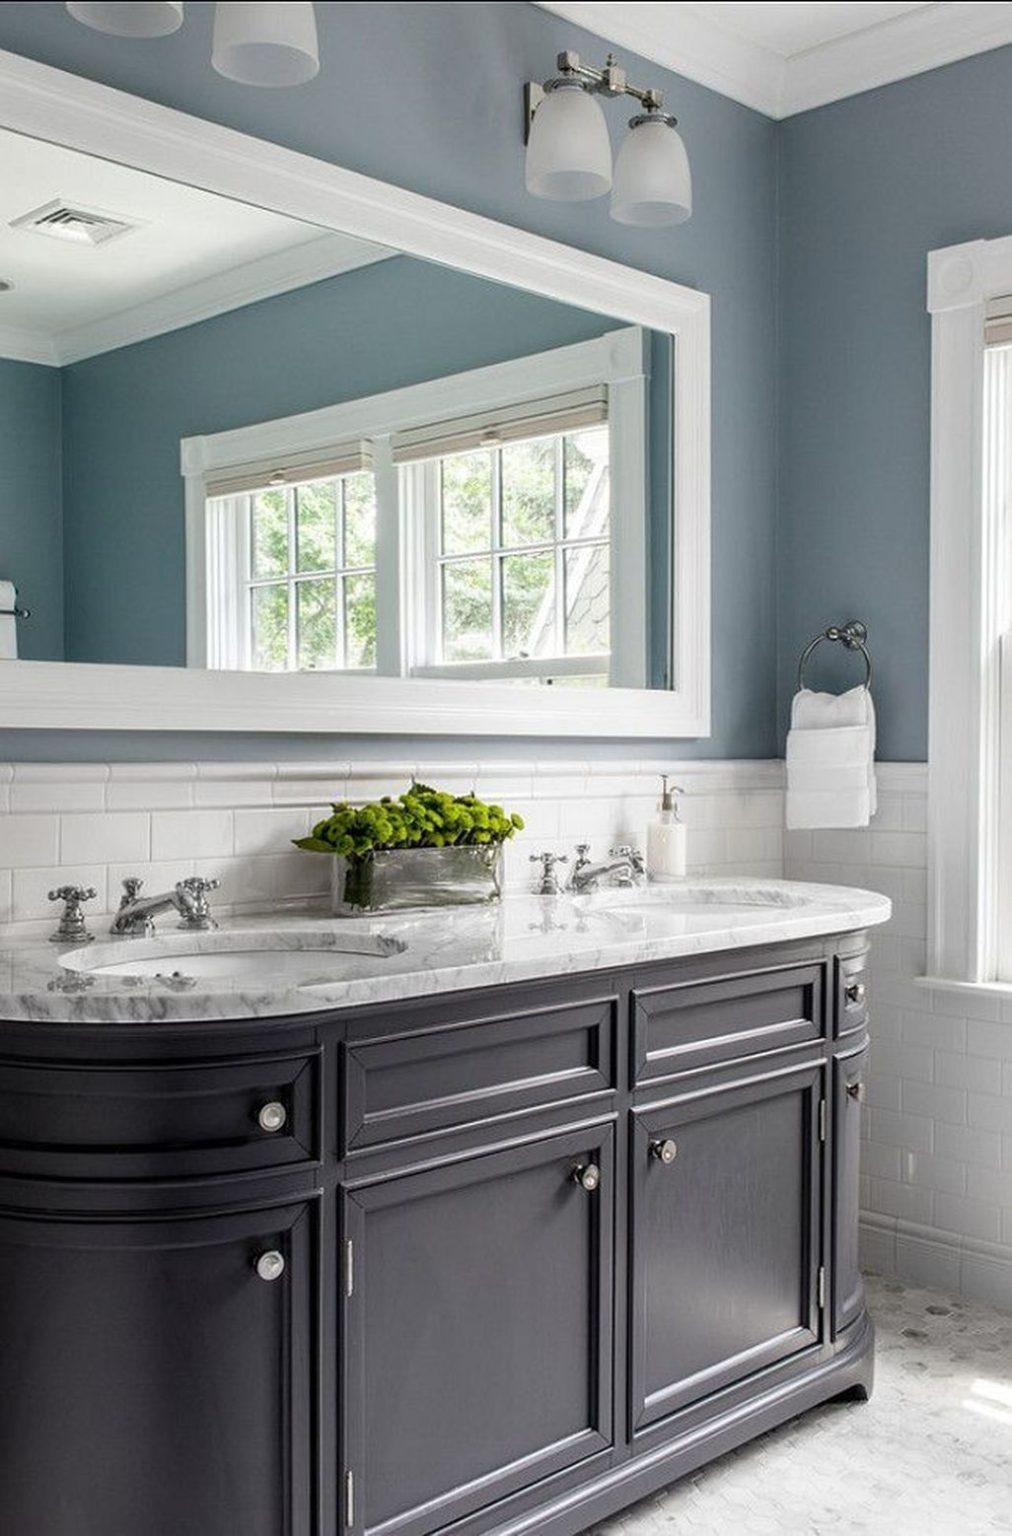 Top 10 Outdated Bathroom Design Trends To Avoid